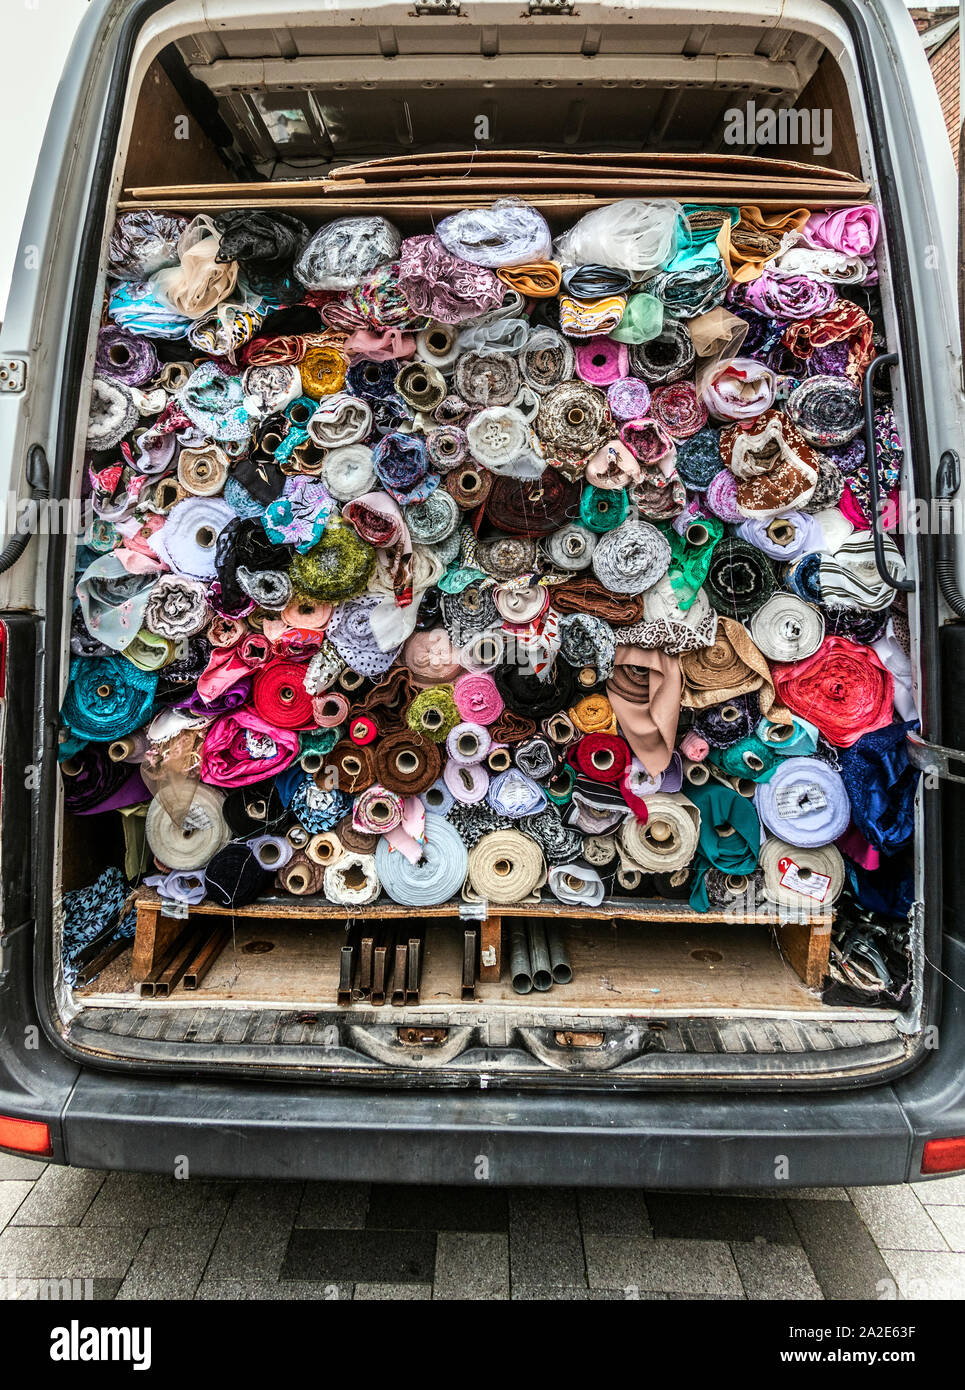 Local trader fills his van with rolls of cloth and textiles after a day selling at his outdoor market stall. The  high street, West Bromwich, West Midlands, UK. Stock Photo